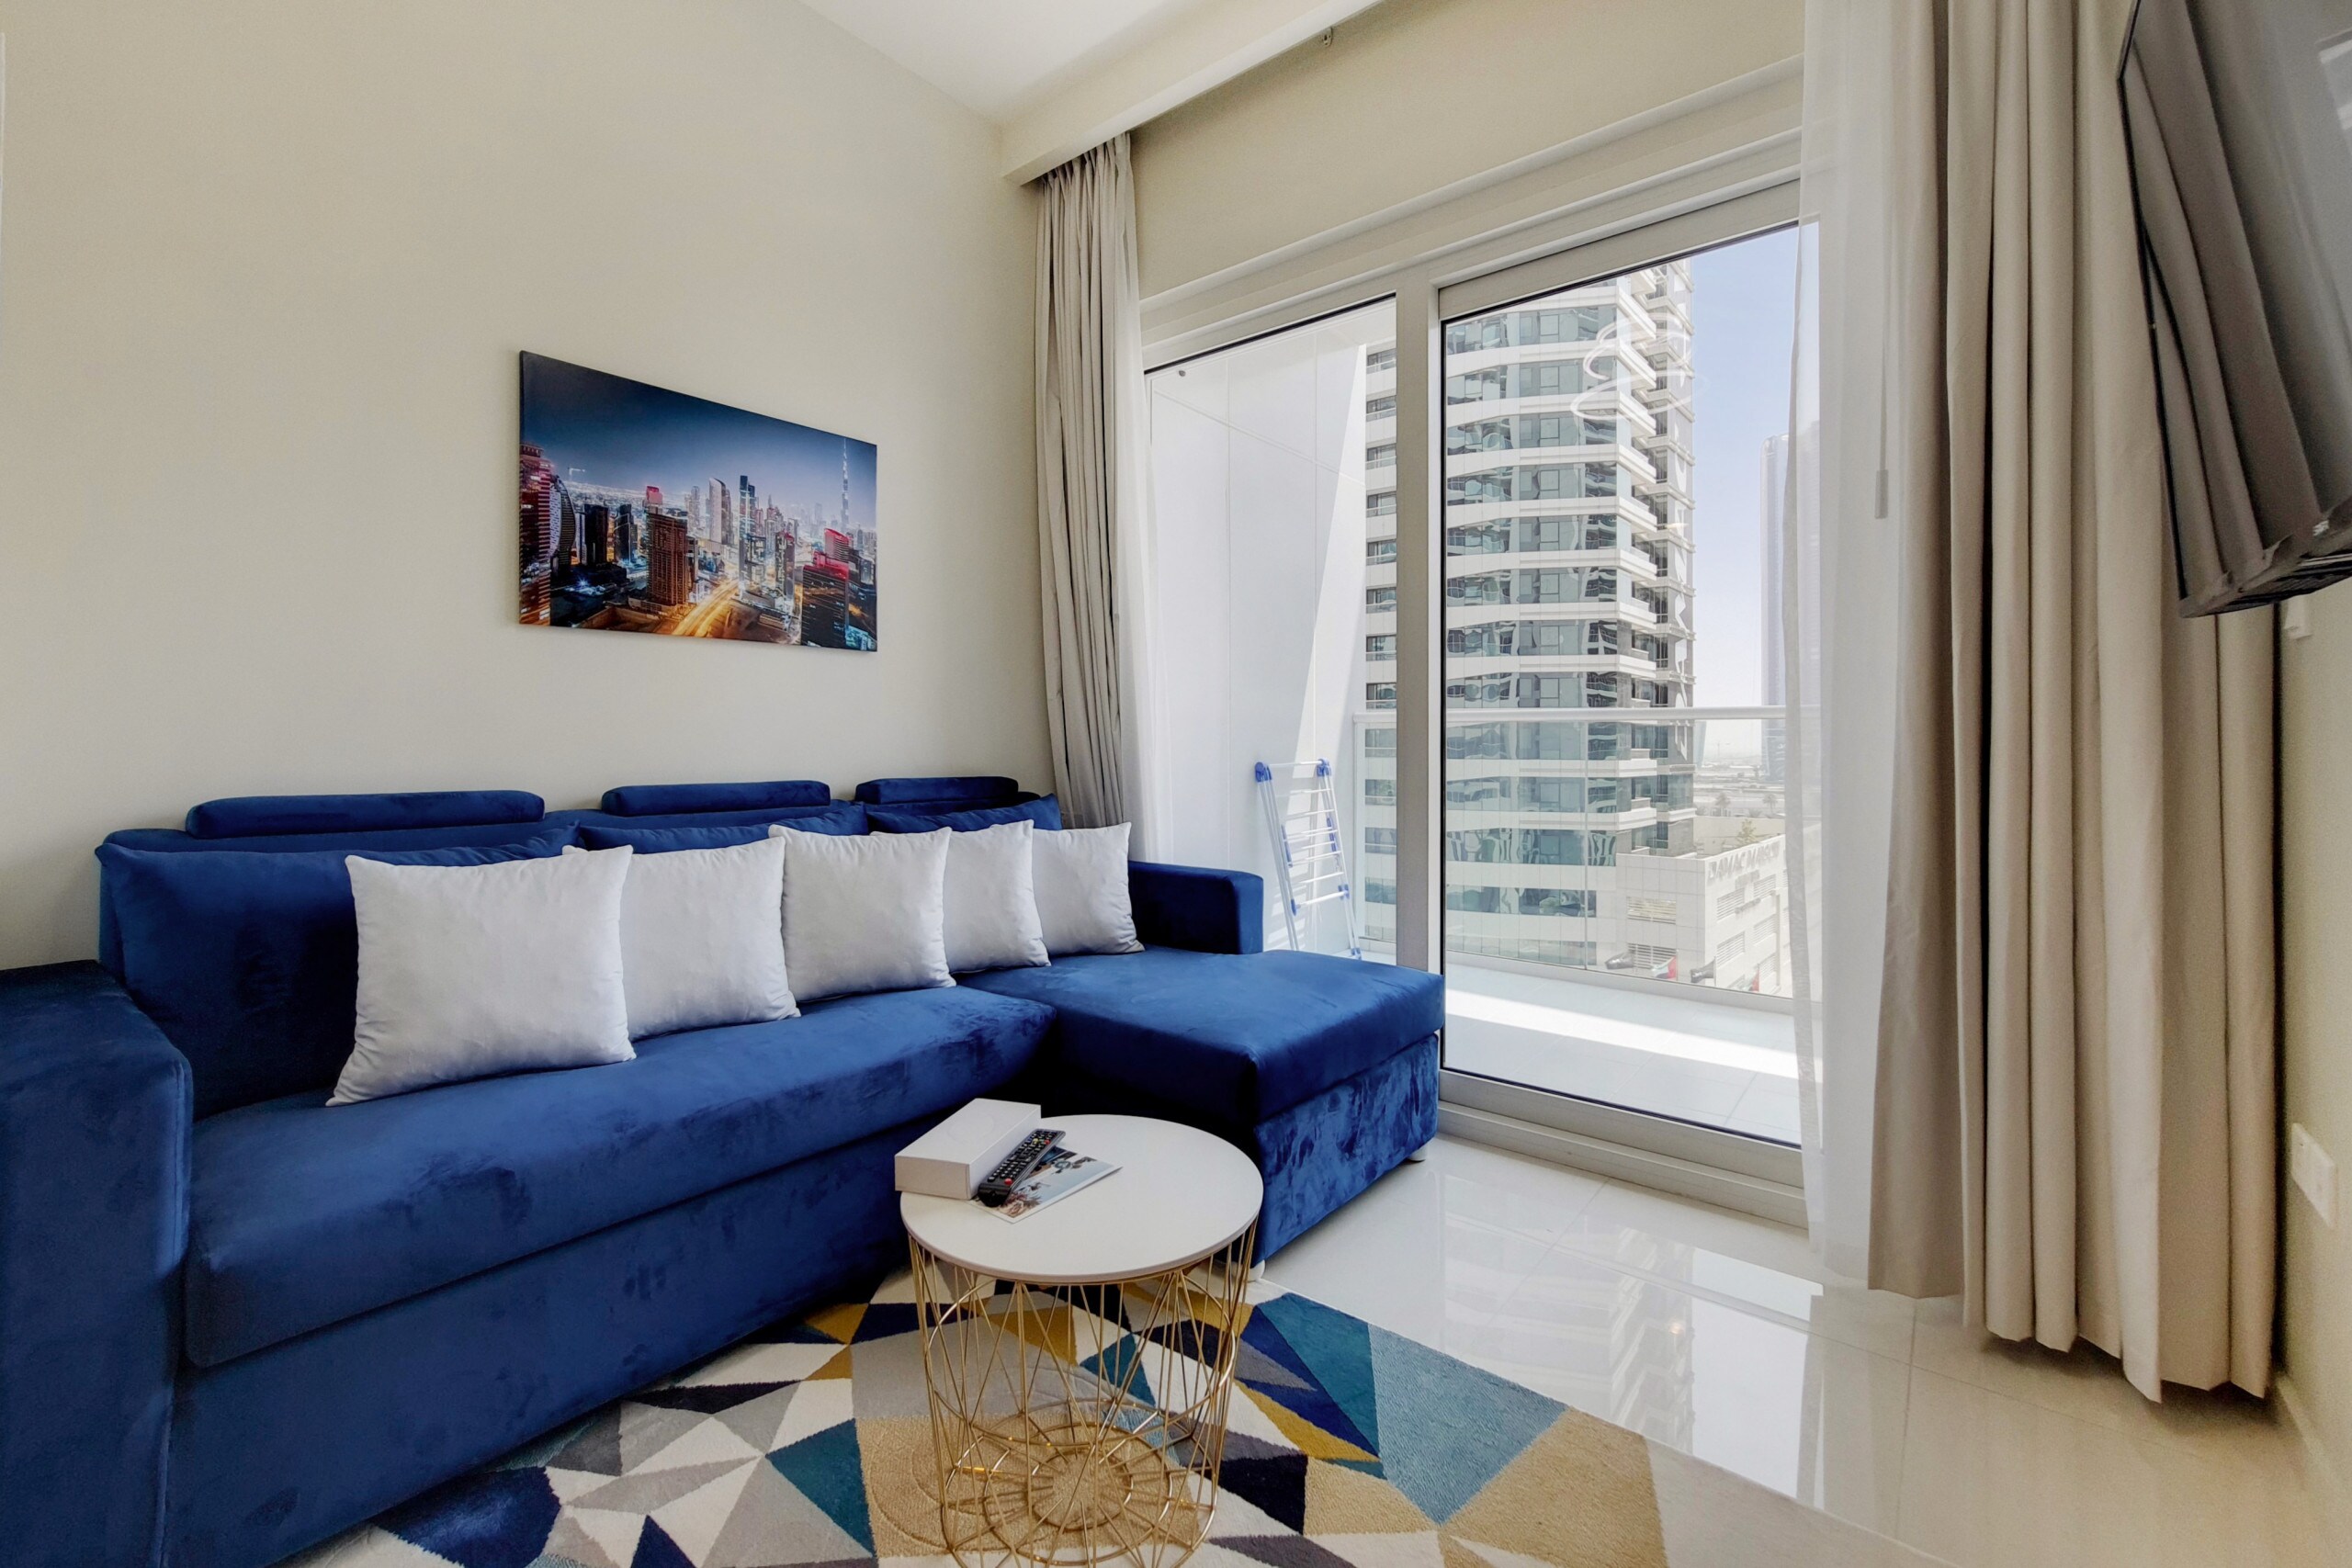 Property Image 1 - Luxury at its finest 1BR Al Habtoor Tower Business Bay